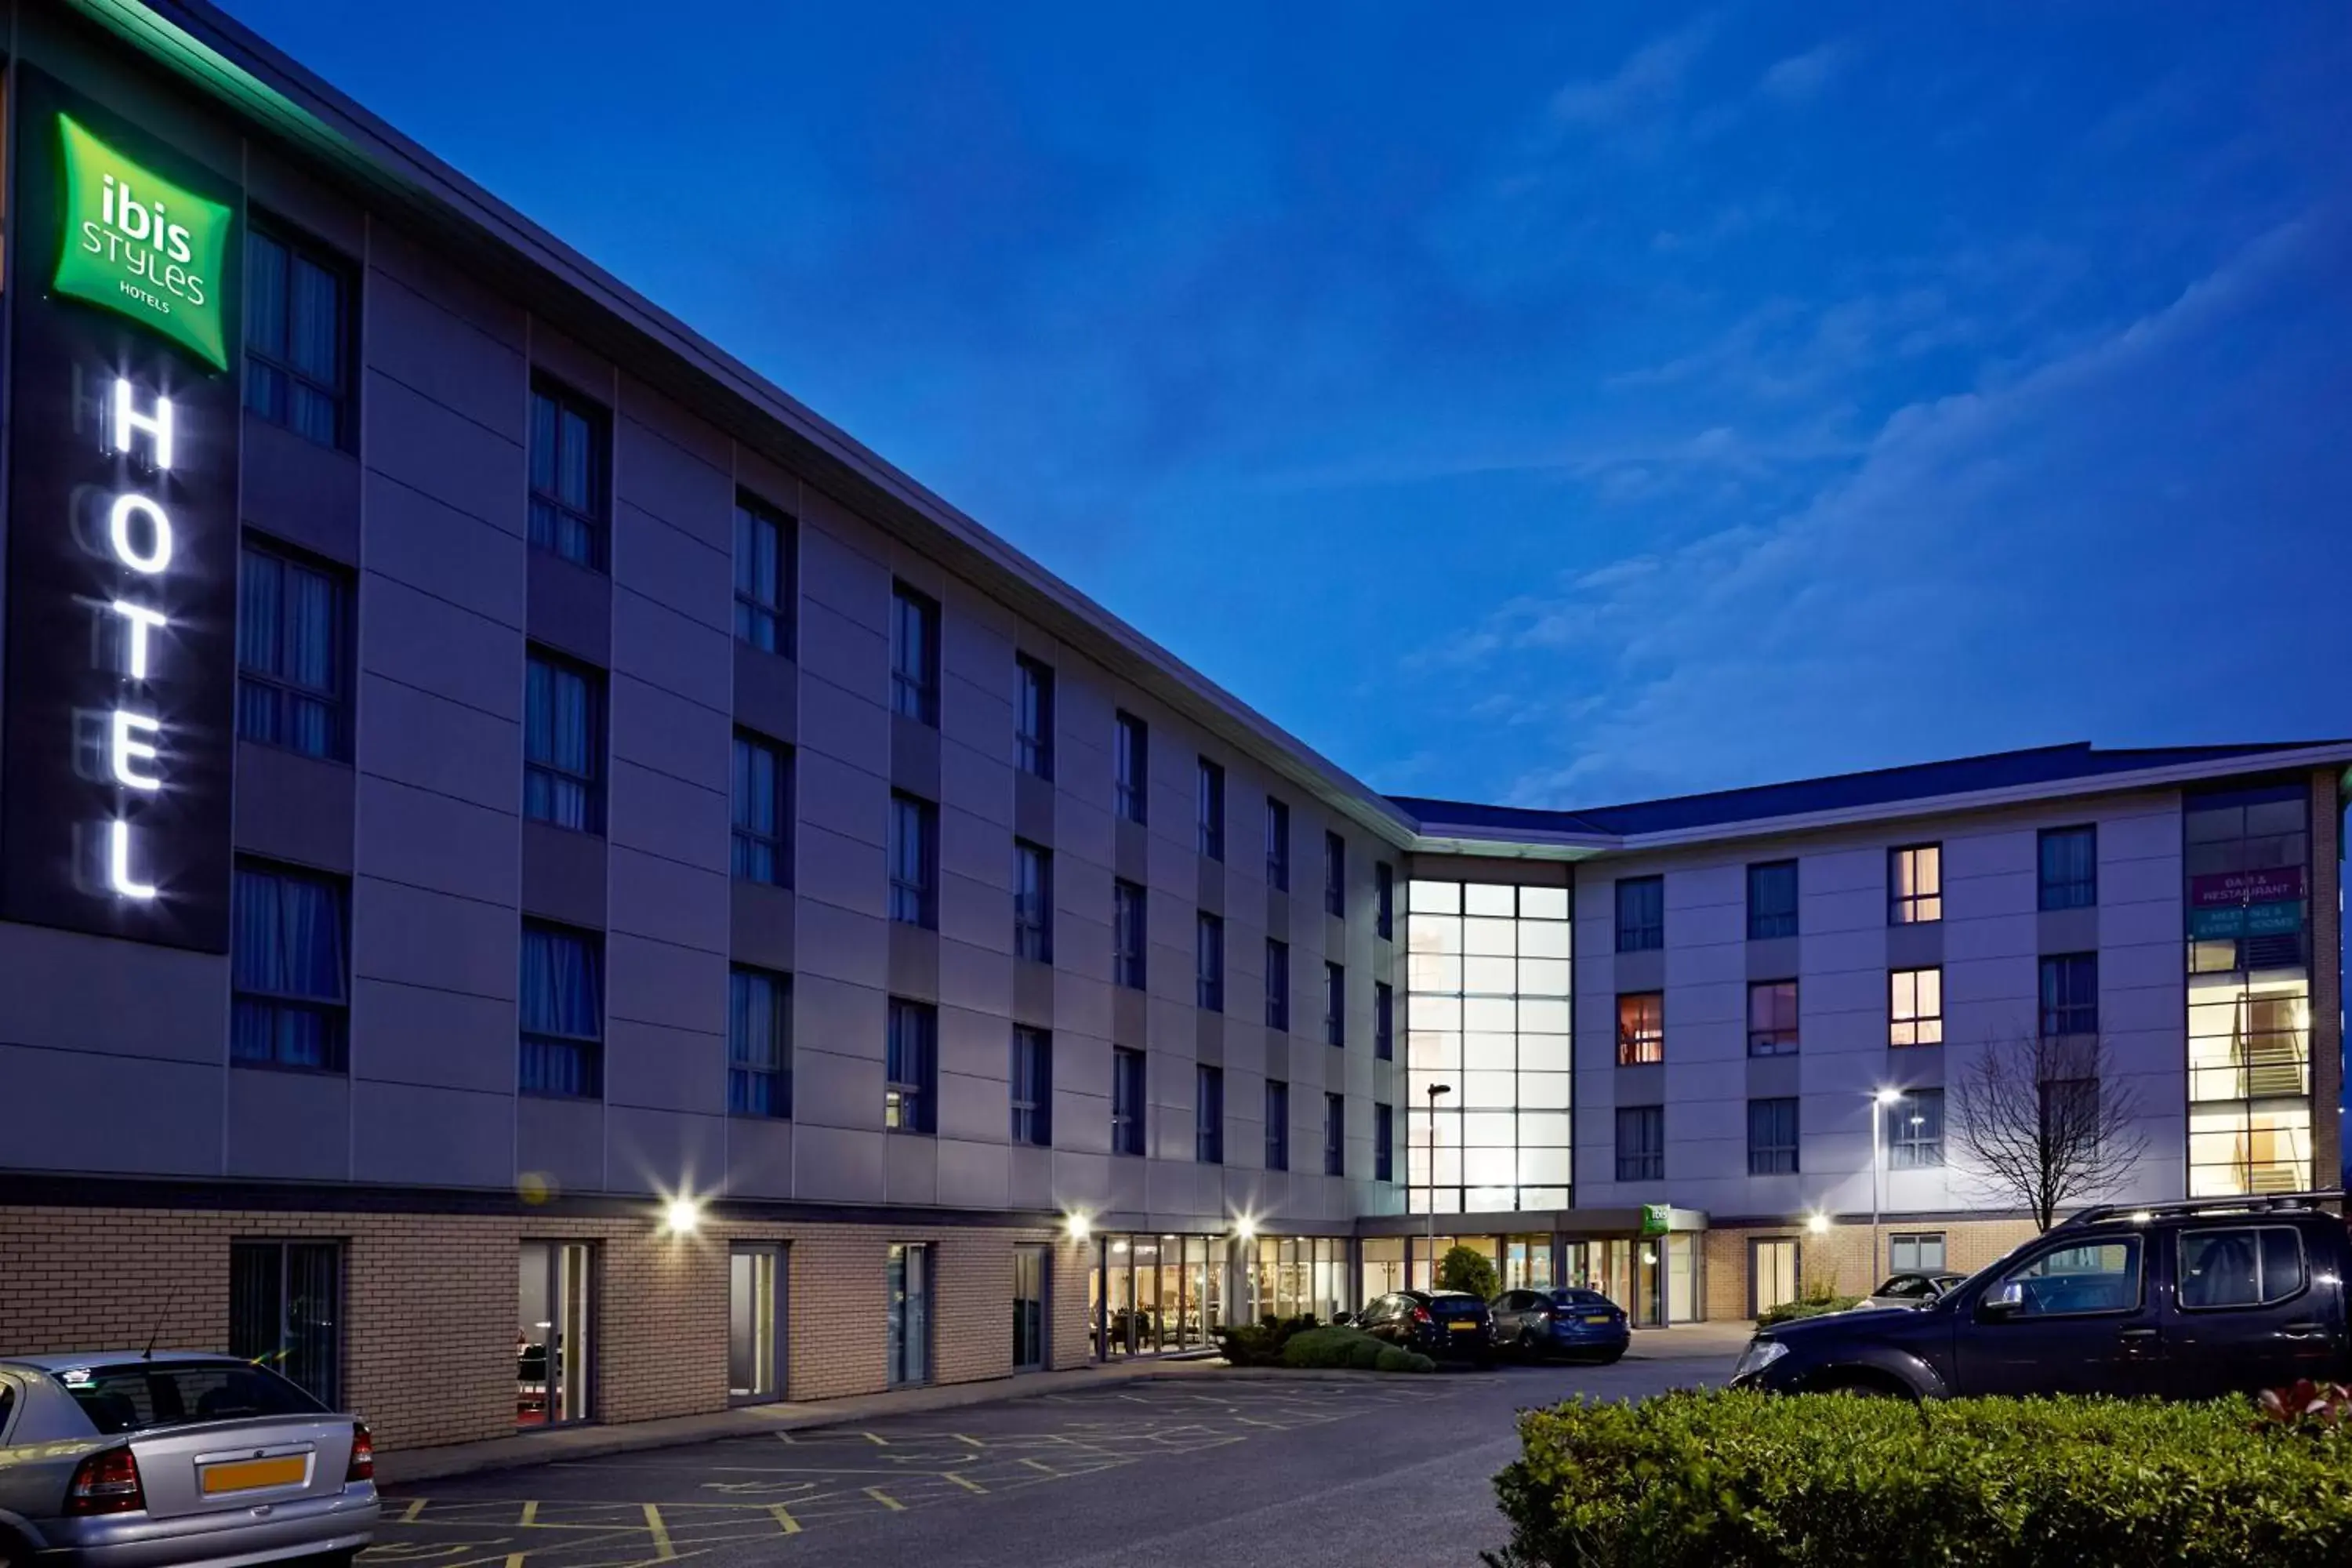 Property Building in ibis Styles Barnsley